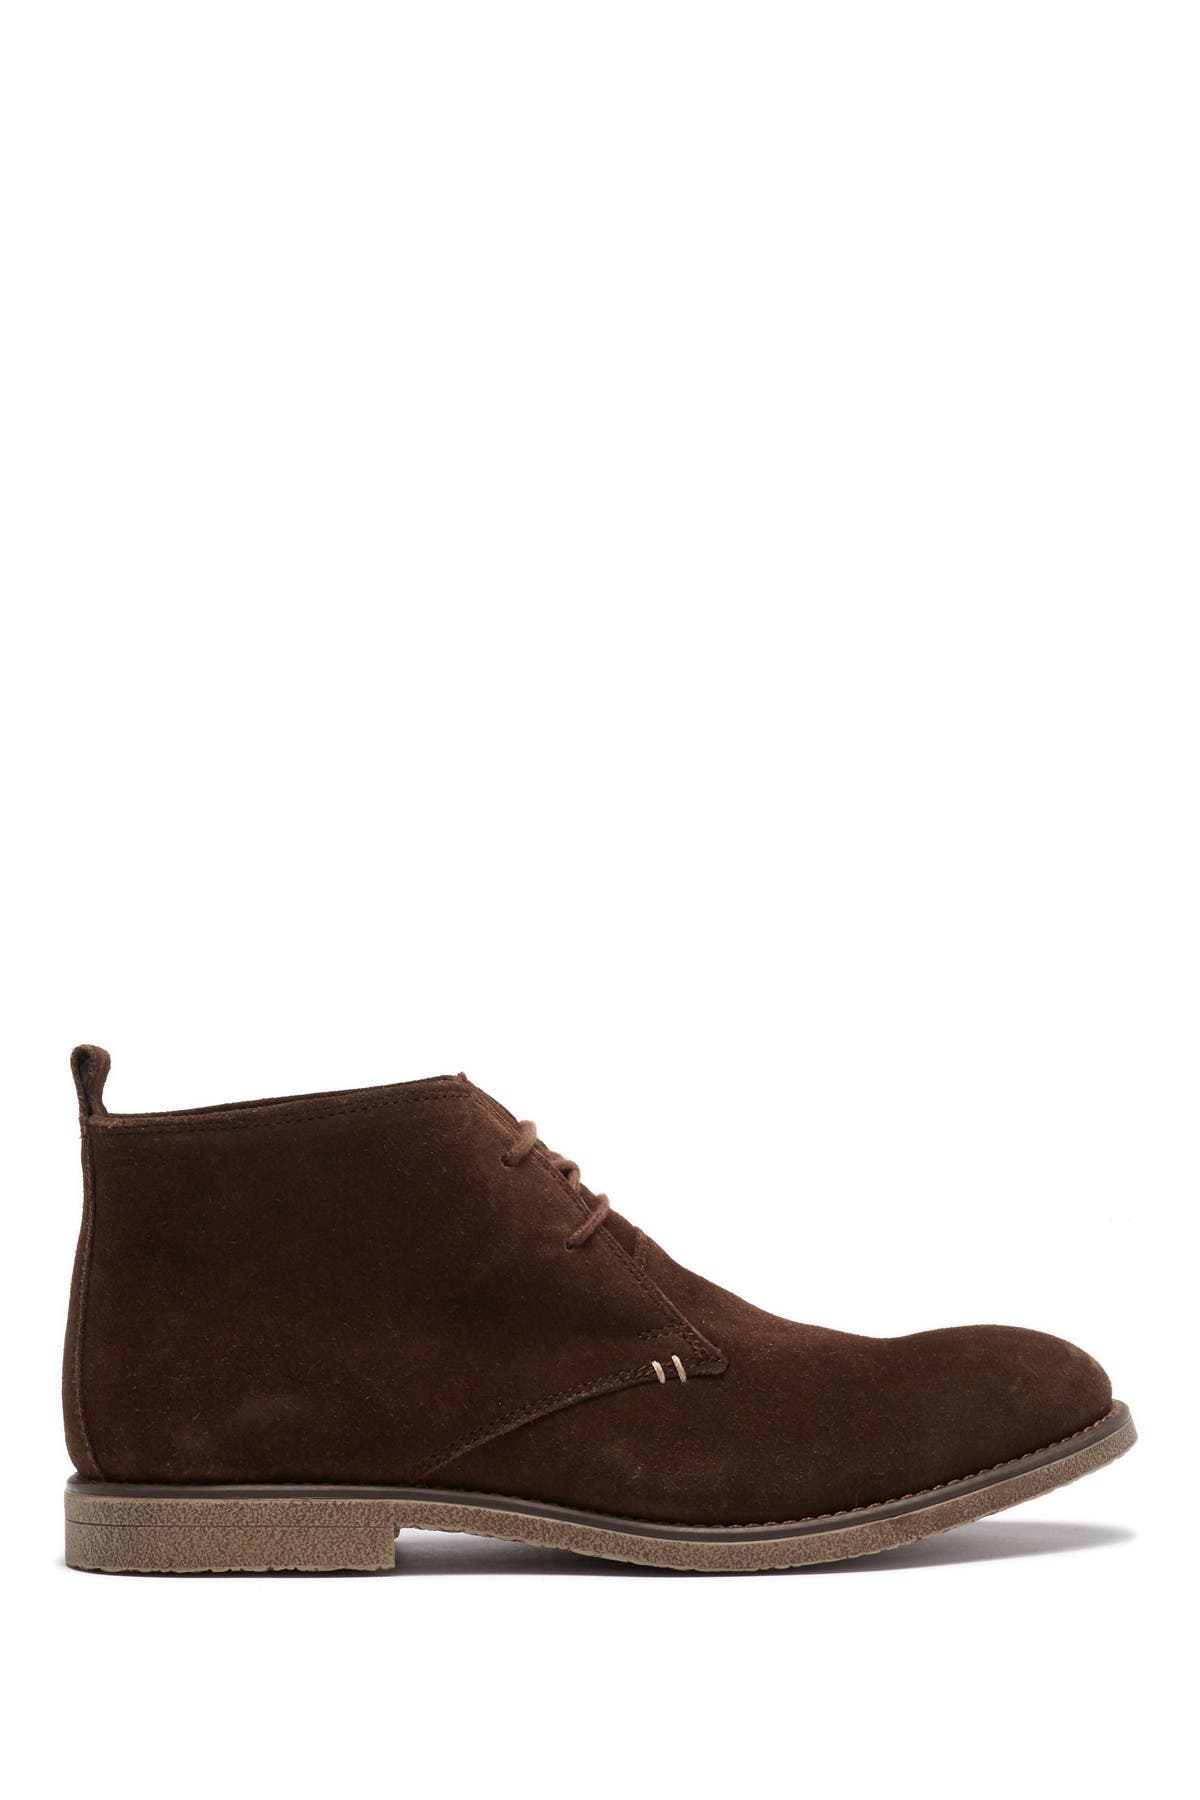 joseph abboud lucca suede chukka boot